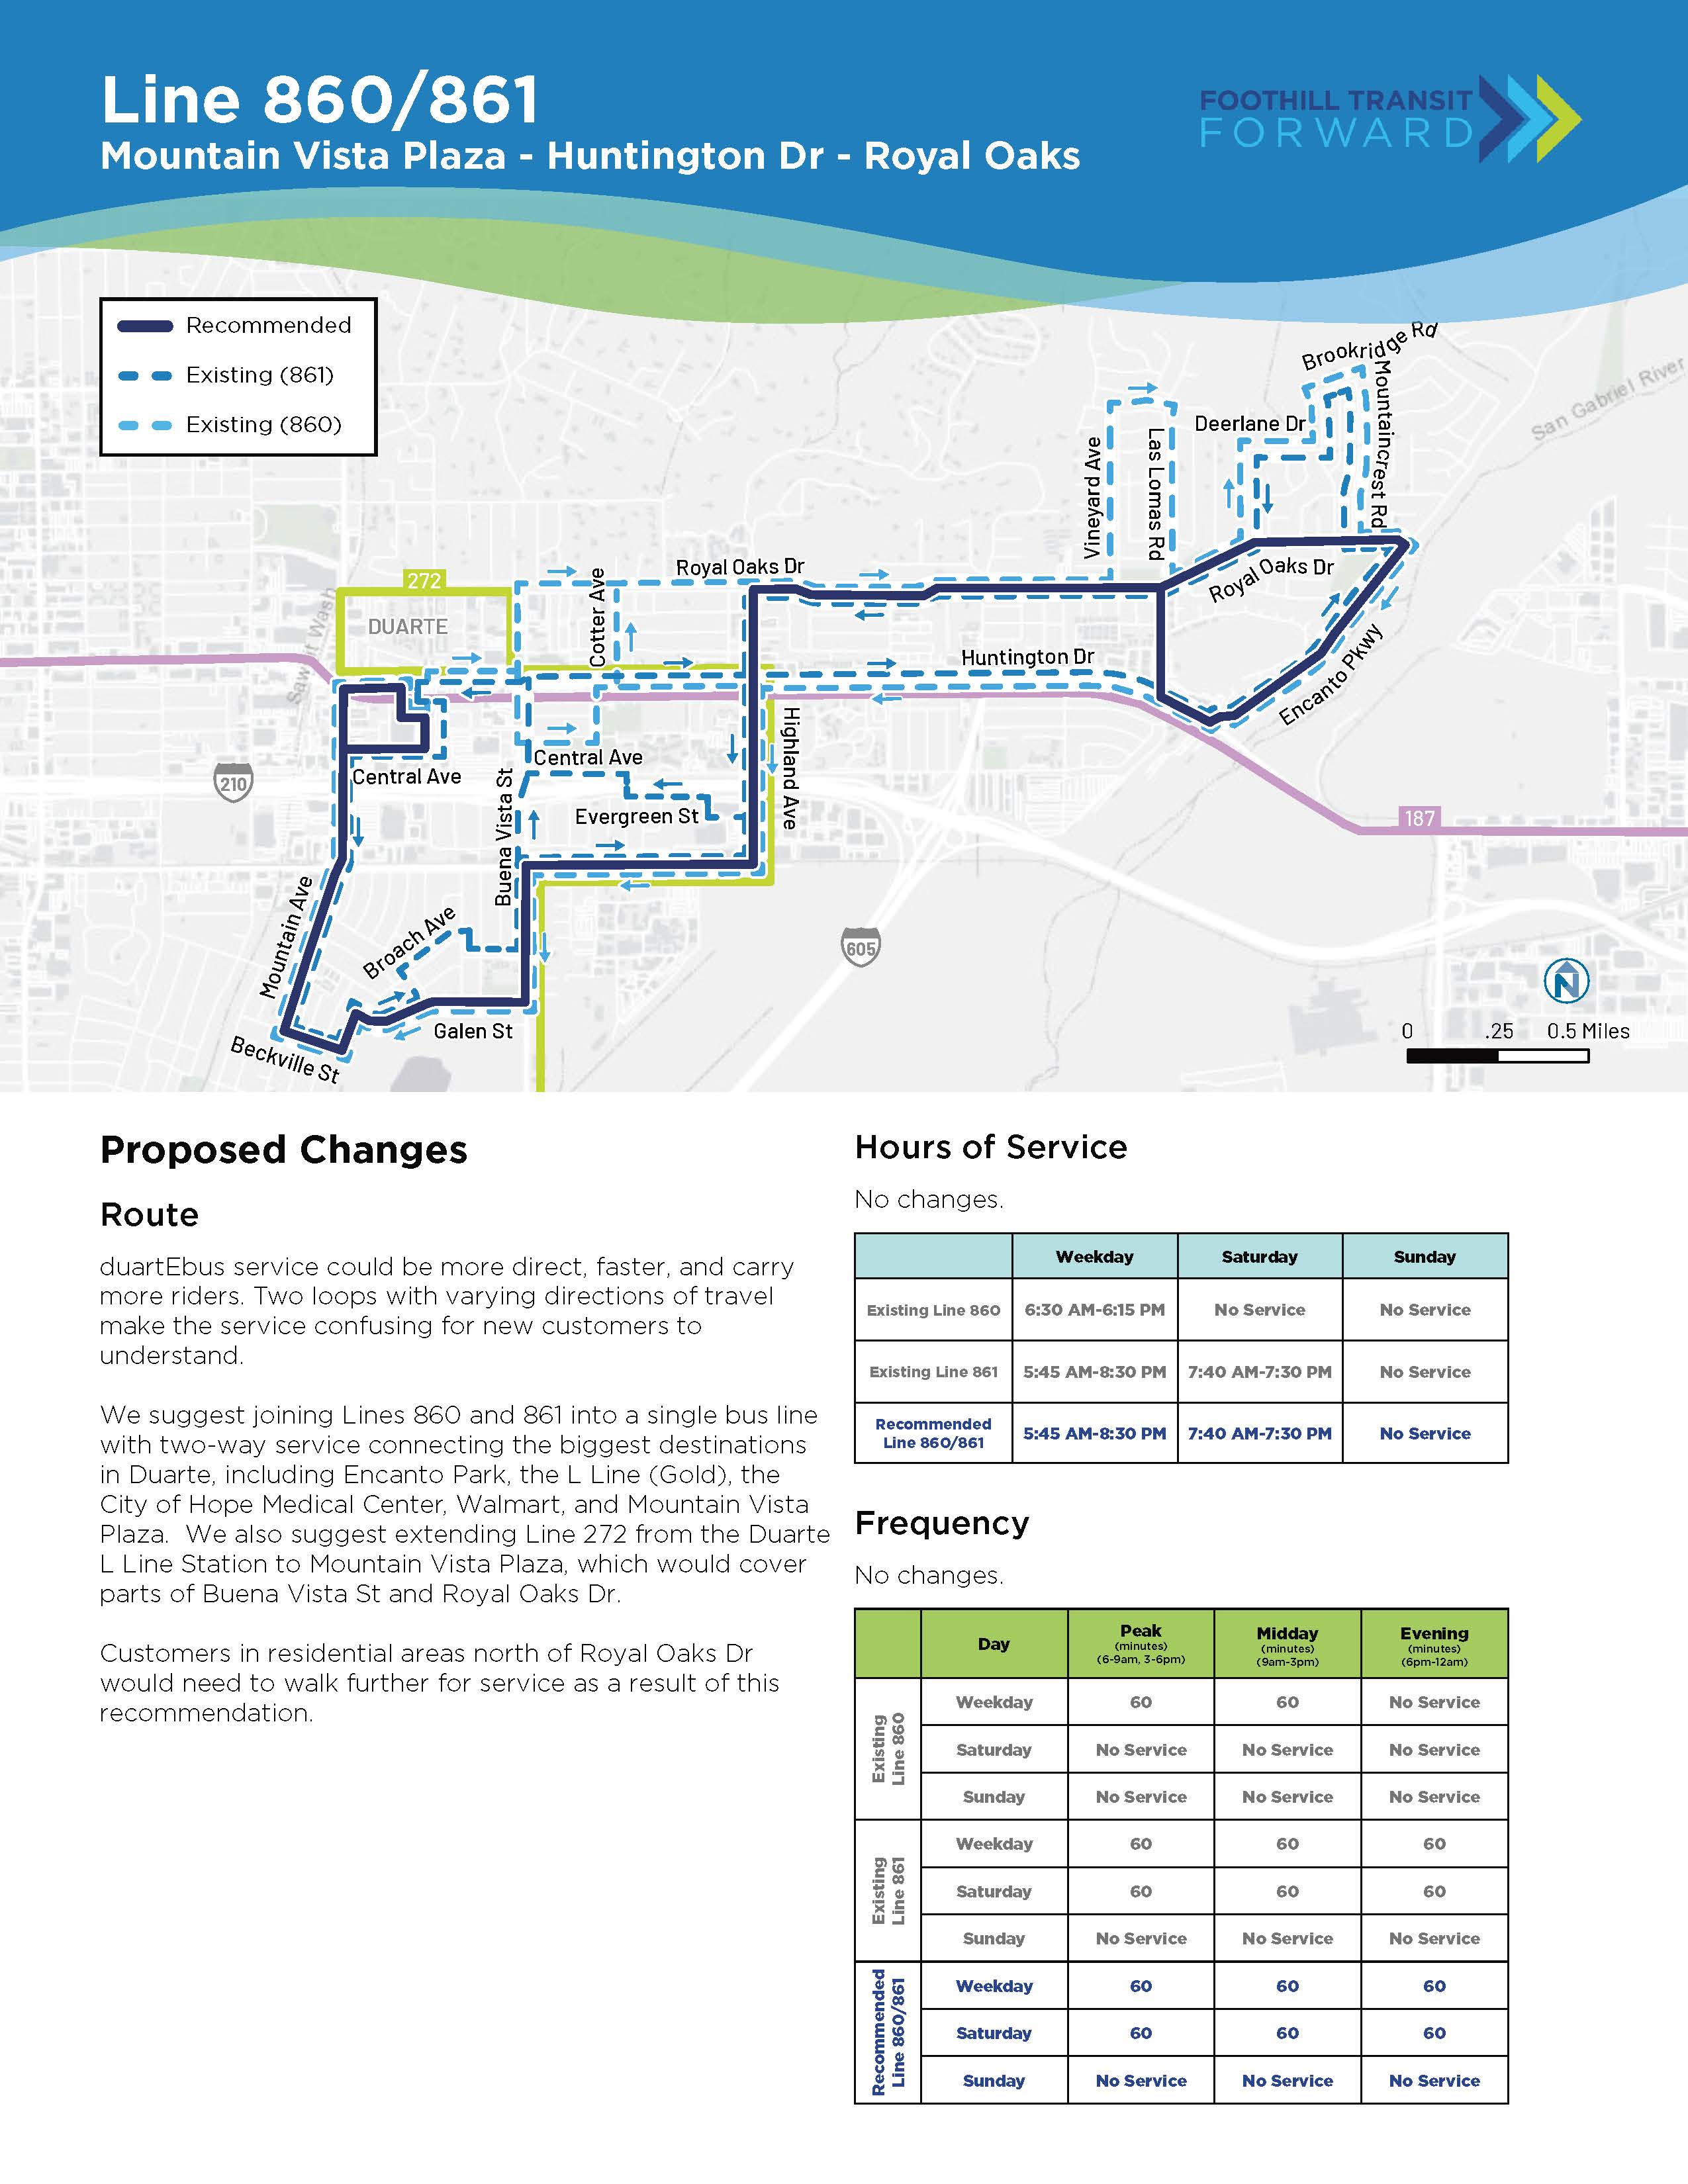 Proposed Changes: Route: duartEbus could be more direct, faster, and carry more riders. 2 loops with varying directions are confusing for new customers. We suggest joining Lines 860 and 861 into a single line with 2-way service connecting big destinations like Encanto Park, the L Line, City of Hope, Walmart, and Target. Our suggested extension of Line 272 would cover parts of Buena Vista St and Royal Oaks Dr. Customers north of Royal Oaks Dr would need to walk further. Service Hours and Frequency: No change